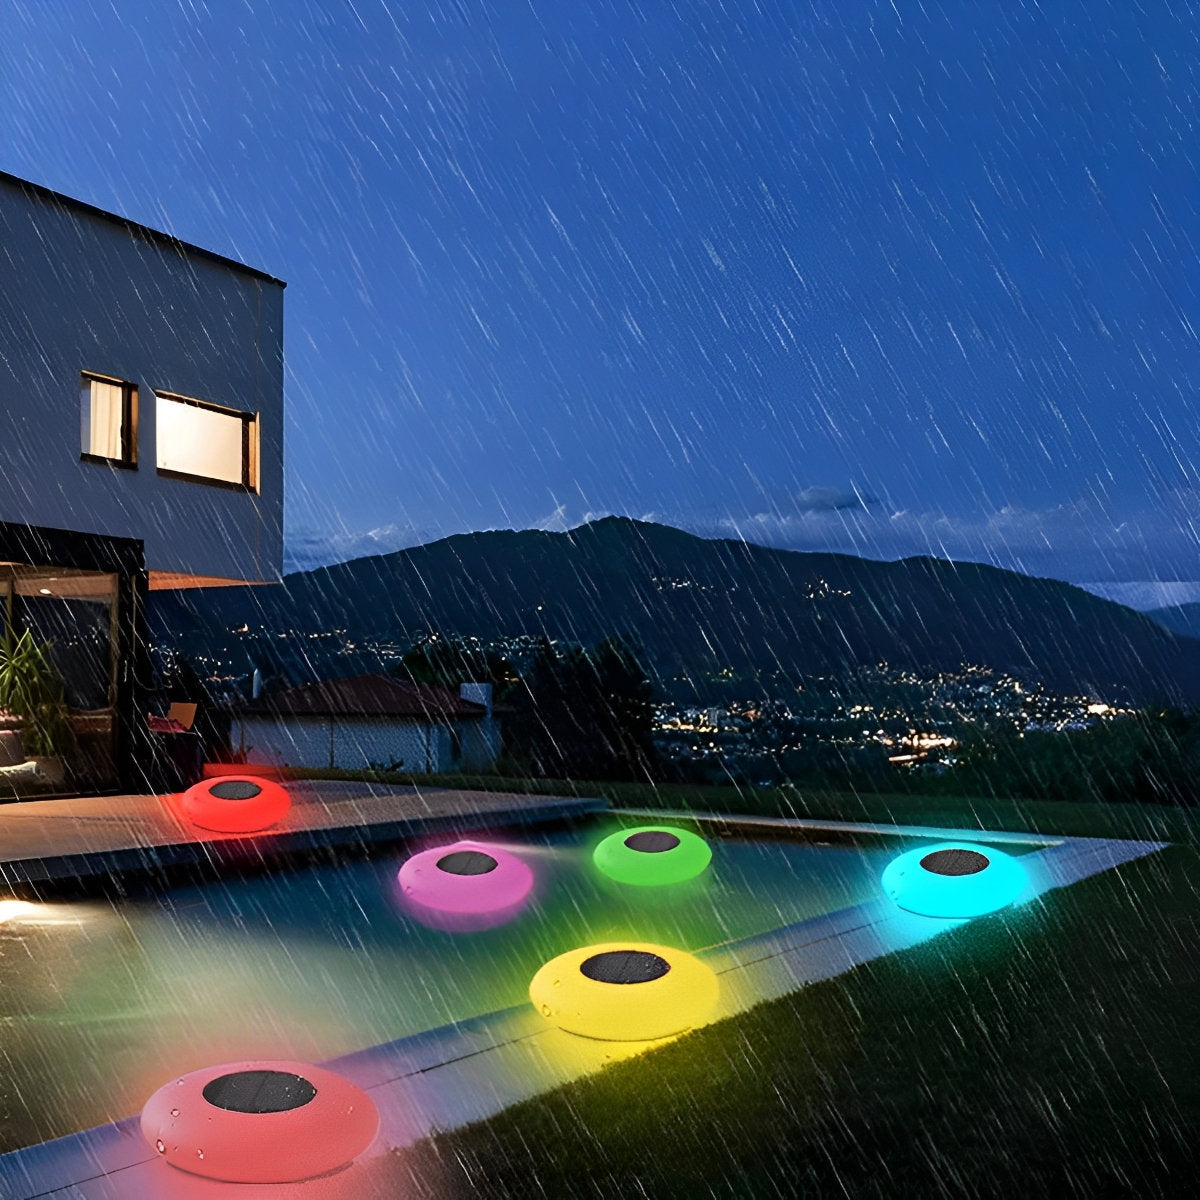 Round Colorful RGB LED Waterproof Solar Modern Outdoor Lights Pool Lights Water Floating Light Pond Lamp - Flyachilles